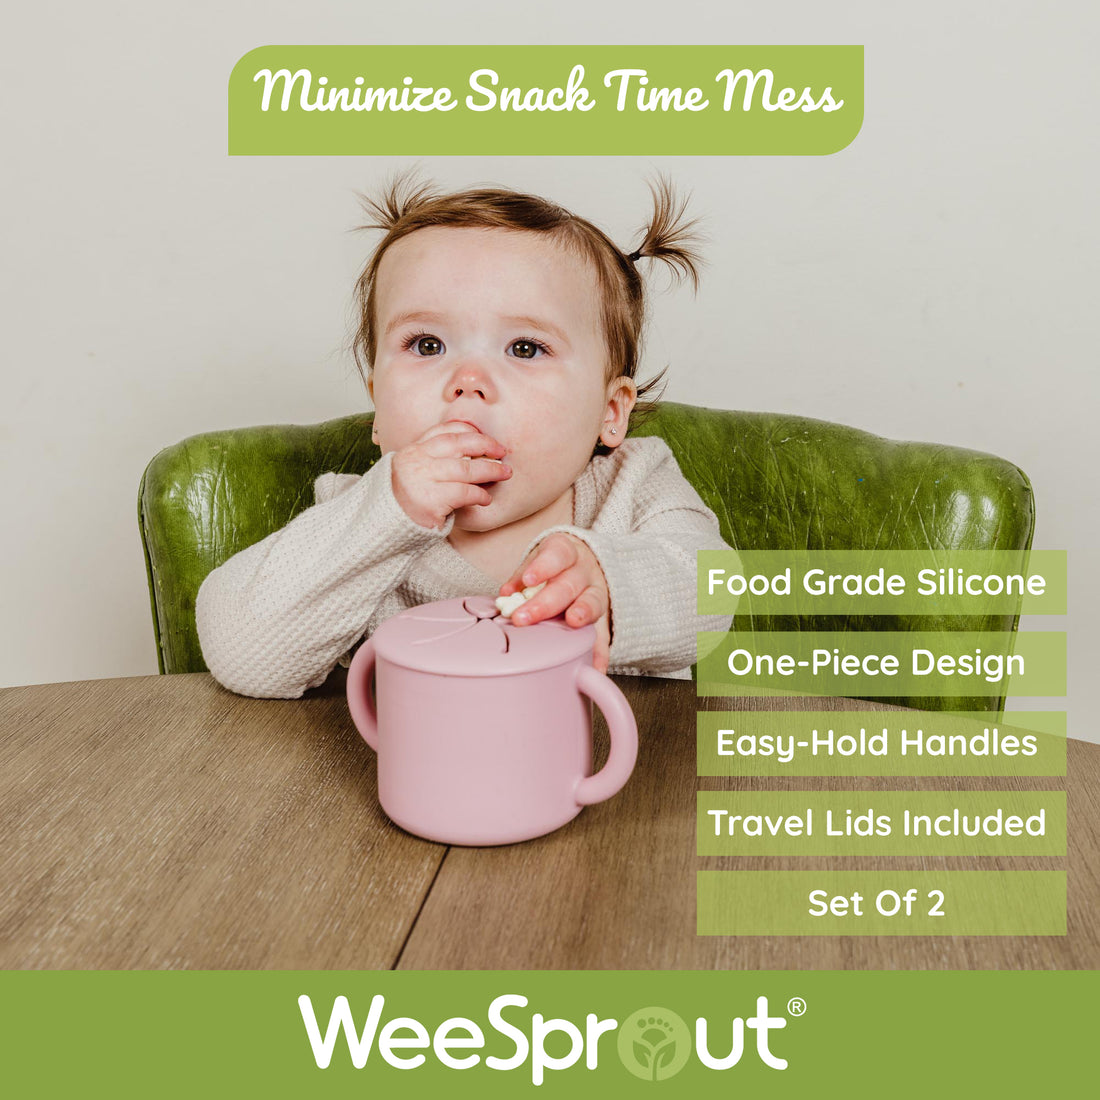 What are the Best Cups for Babies and Toddlers? - SR Nutrition